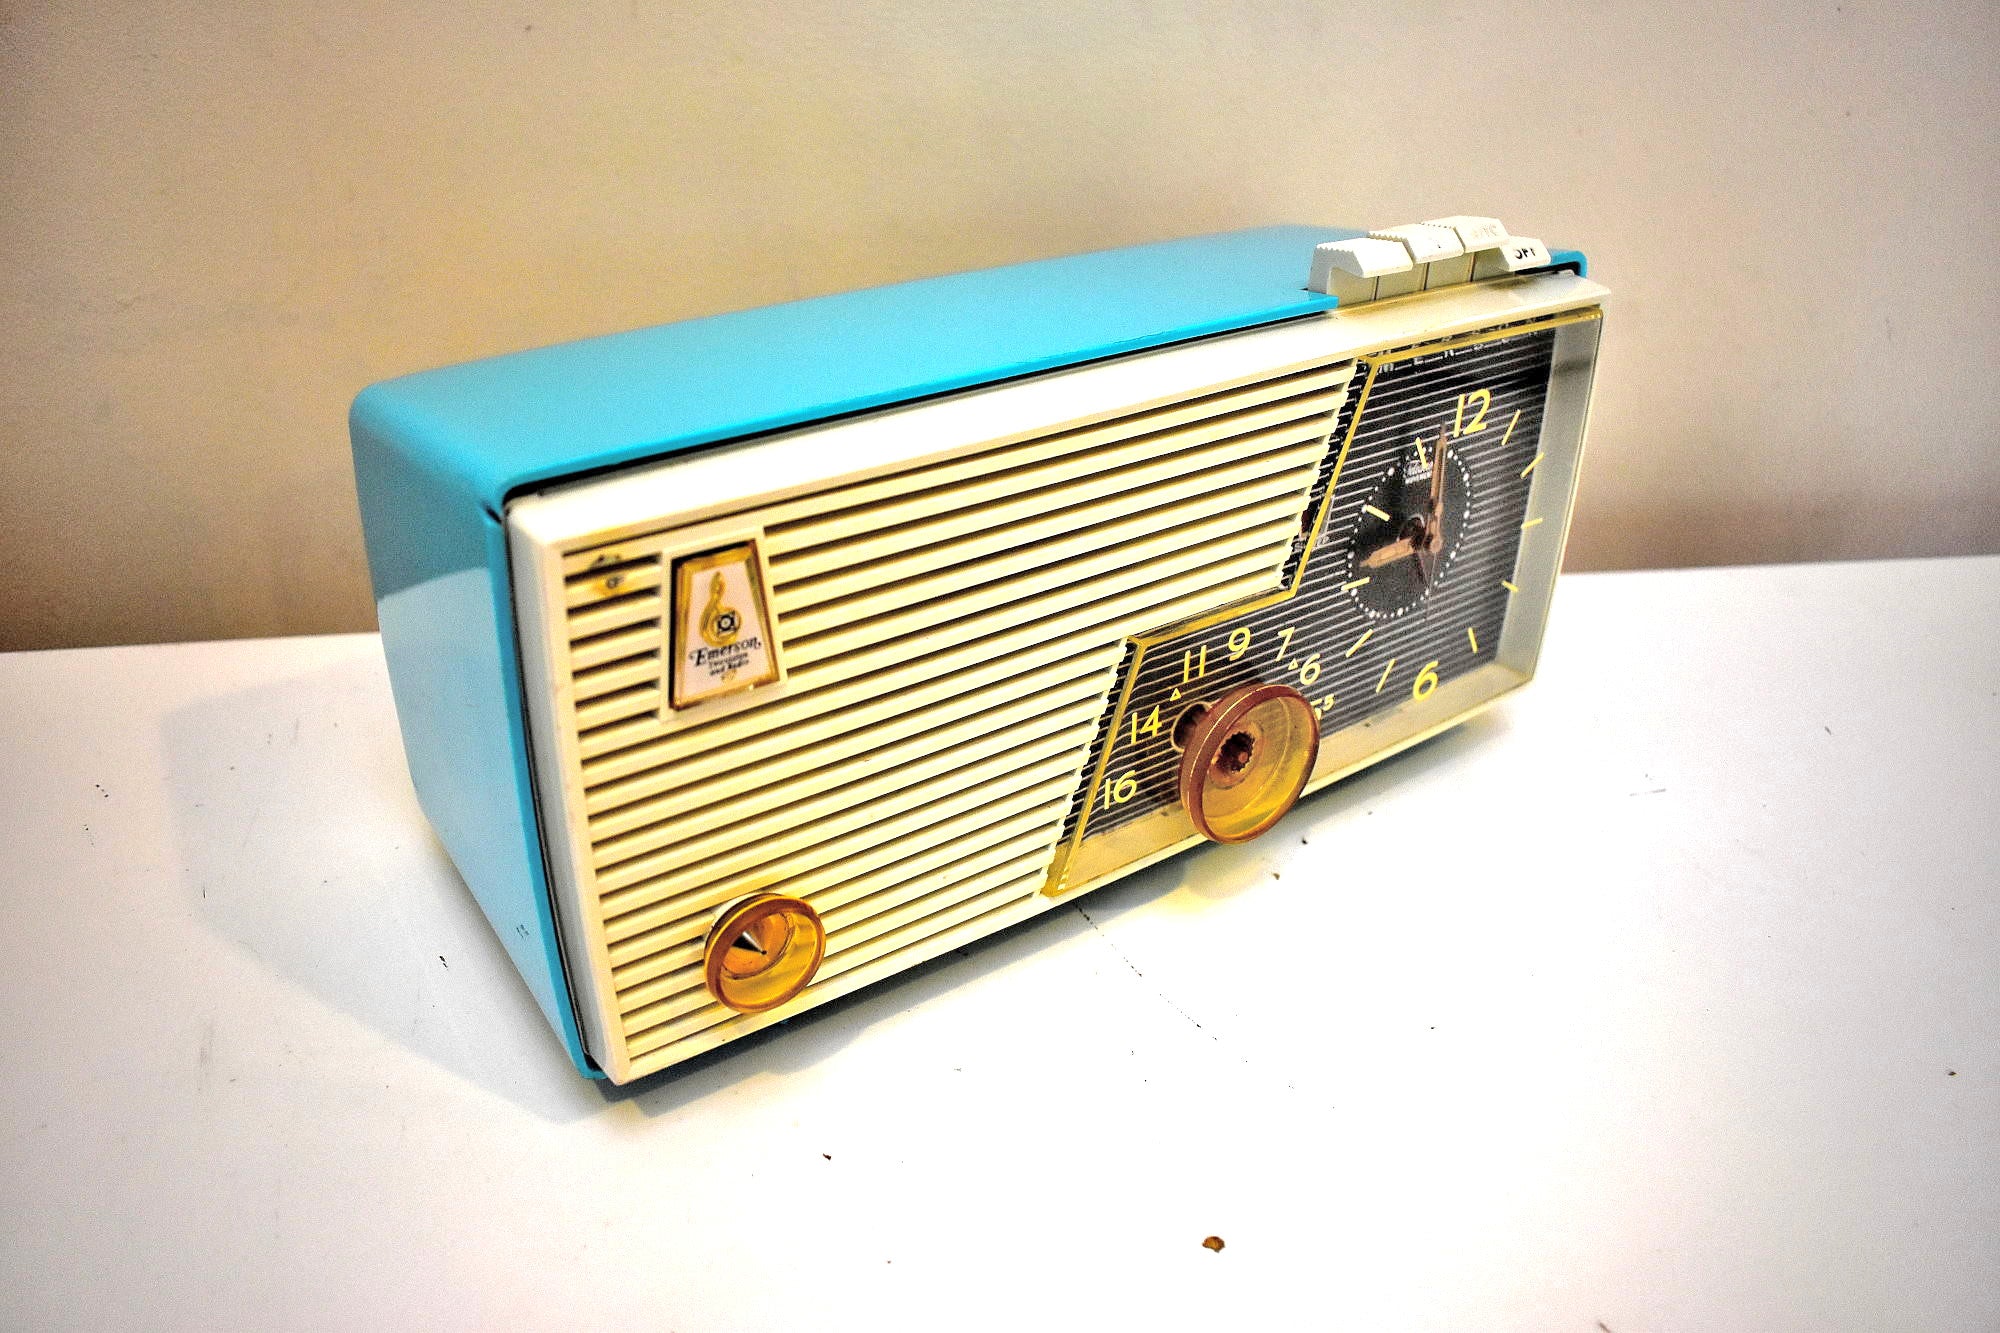 Sky Blue Turquoise and White  Emerson Model  Tube AM Radio